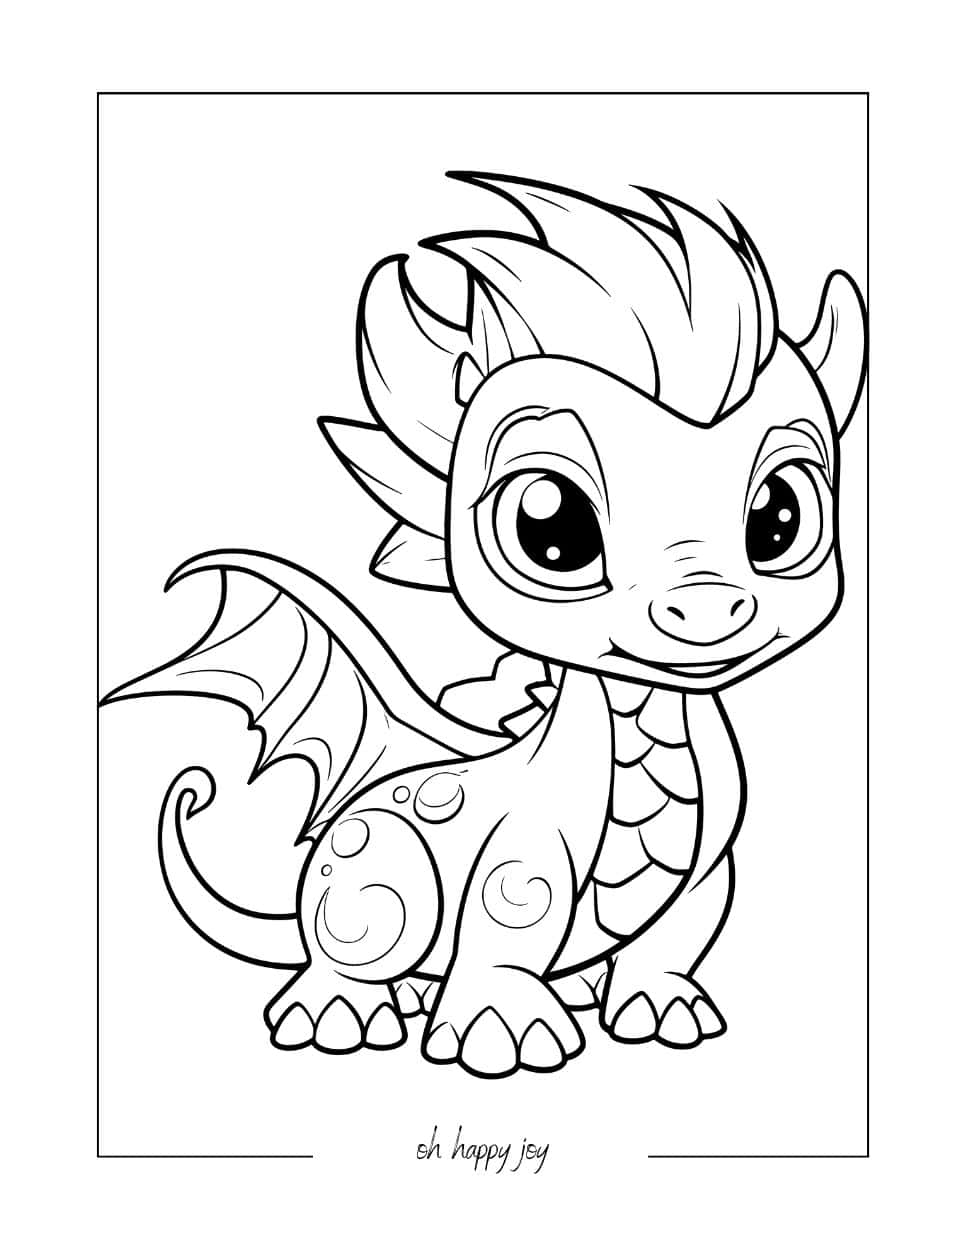 Cool Dragon Coloring Page